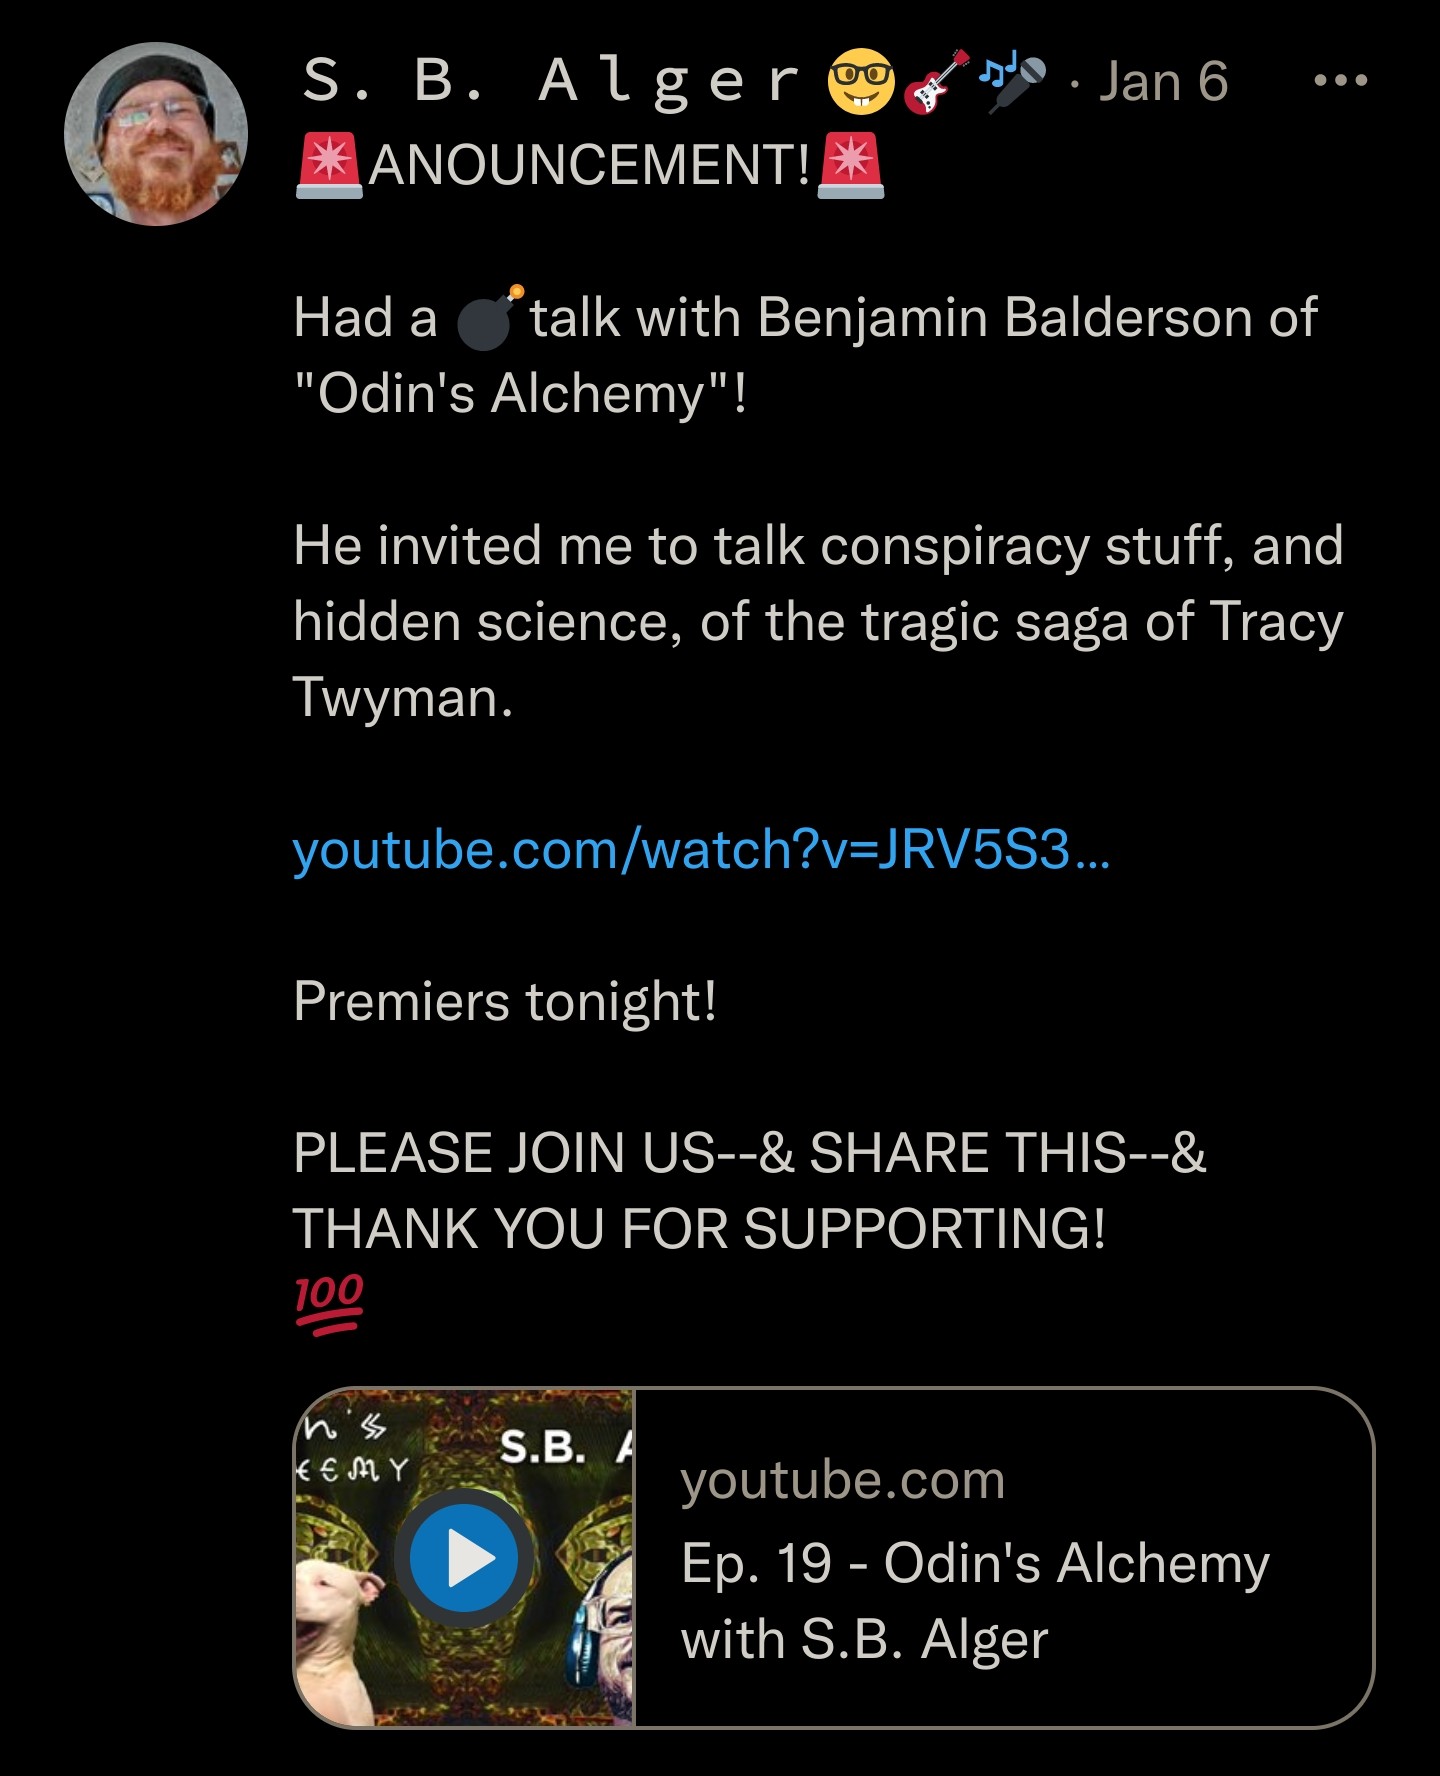 Twitter S. B. Alger @sewneo Anouncement! [original spelling]:  Had a xx talk with Benjamin Balderson of "Odin's Alchemy"!  He invited me to talk conspiracy stuff, and hidden science, of tragic saga of Tracy Twyman.  Premiers tonight!  PLEASE JOIN US--& SHARE THIS--& THANK YOU FOR SUPPORTING!